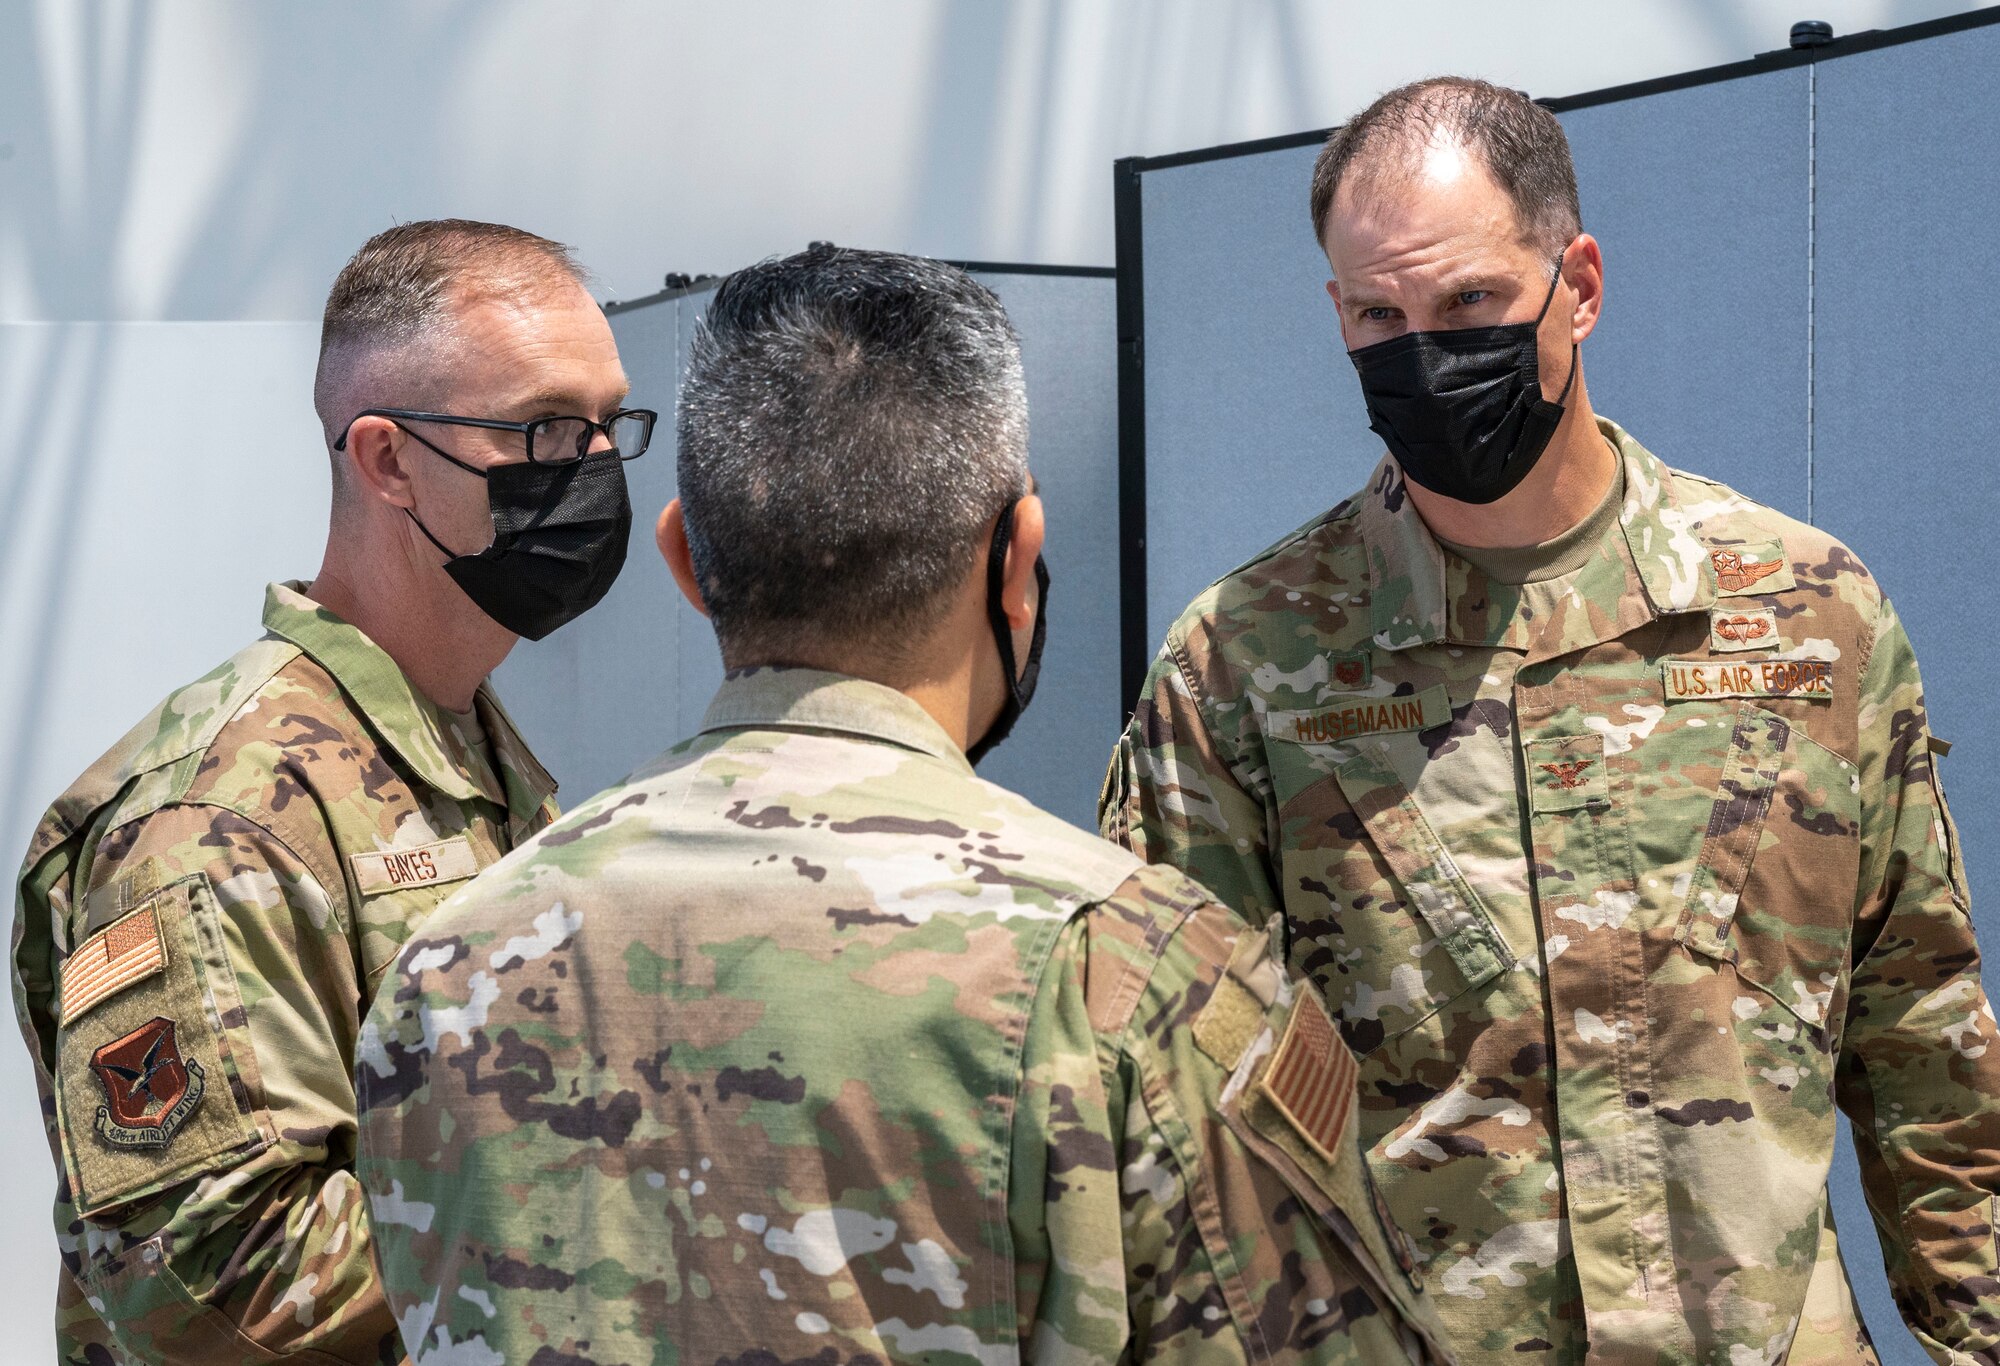 Chief Master Sgt. Timothy Bayes, left, 436th Airlift Wing command chief and Col. Matt Husemann, right, 436th AW commander, speak with Capt. Samuel Chavez, Patriot Express COVID-19 testing site officer in charge, at the Baltimore/Washington International Thurgood Marshall Airport in Baltimore, June 27, 2021. The facility, operated by Team Dover and other Air Mobility Command Airmen since November 2020, provides on-site, rapid COVID-19 testing for individuals traveling to overseas duty locations. (U.S. Air Force photo by Airman 1st Class Cydney Lee)